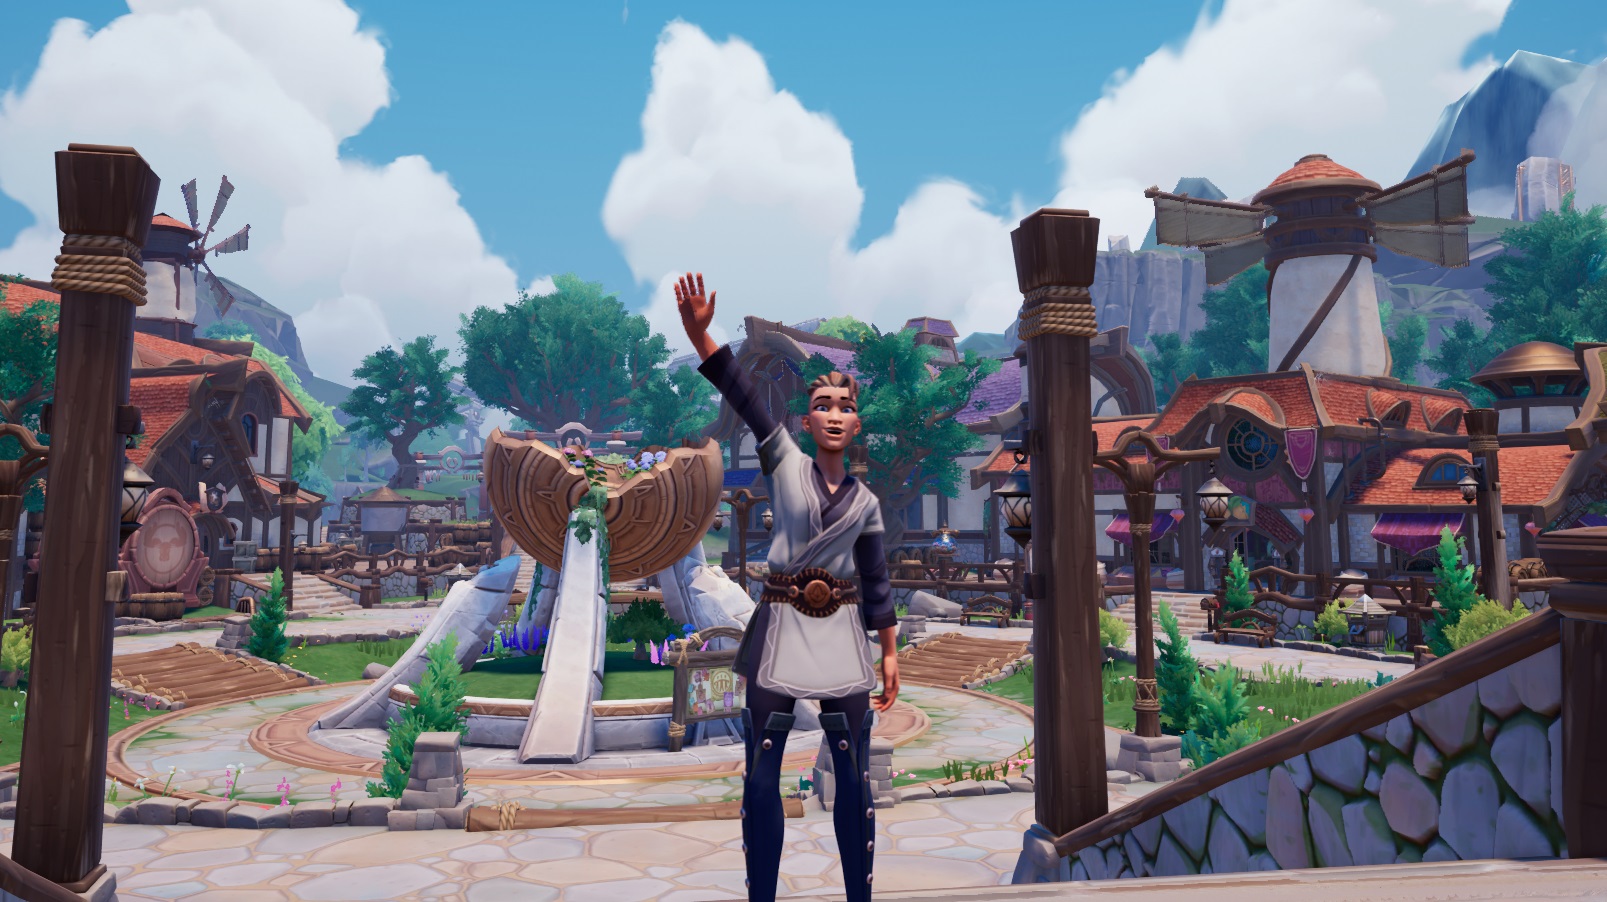  Combat-free MMO Palia is giving me high hopes for the future of 'cozy' MMOs 